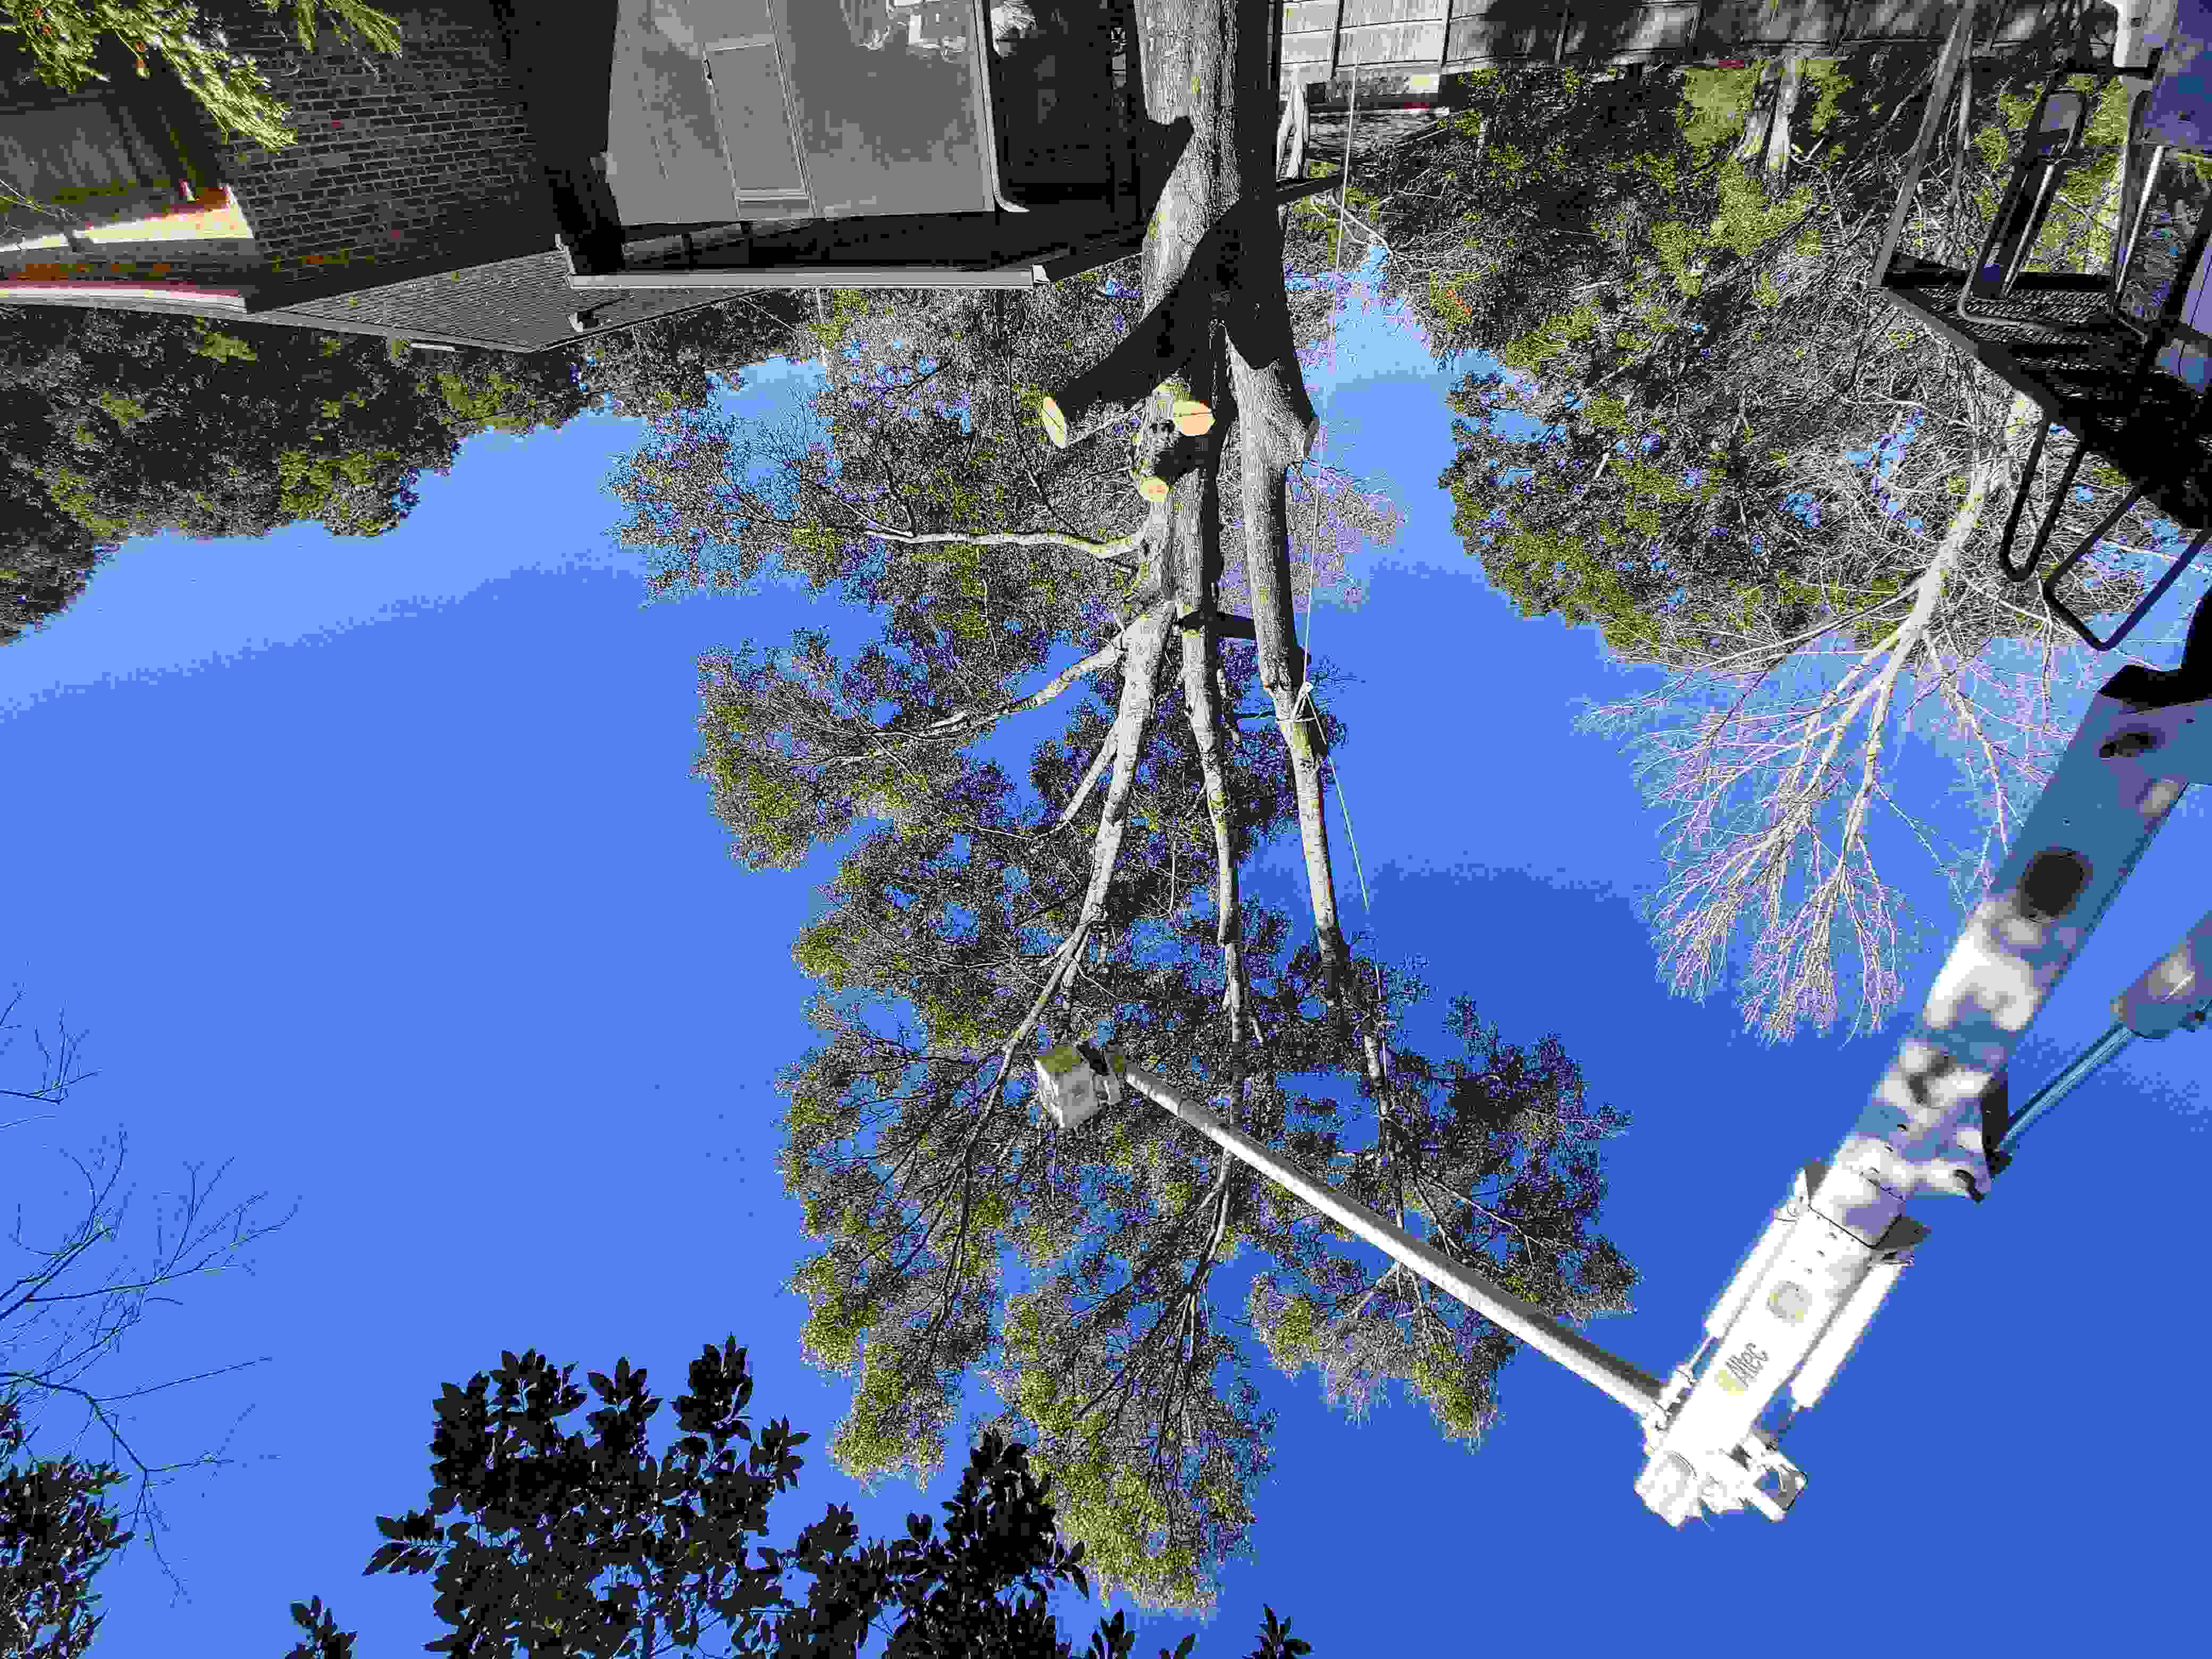 A low angle view of a bucket truck extending high into the canopy of a partially removed tree.